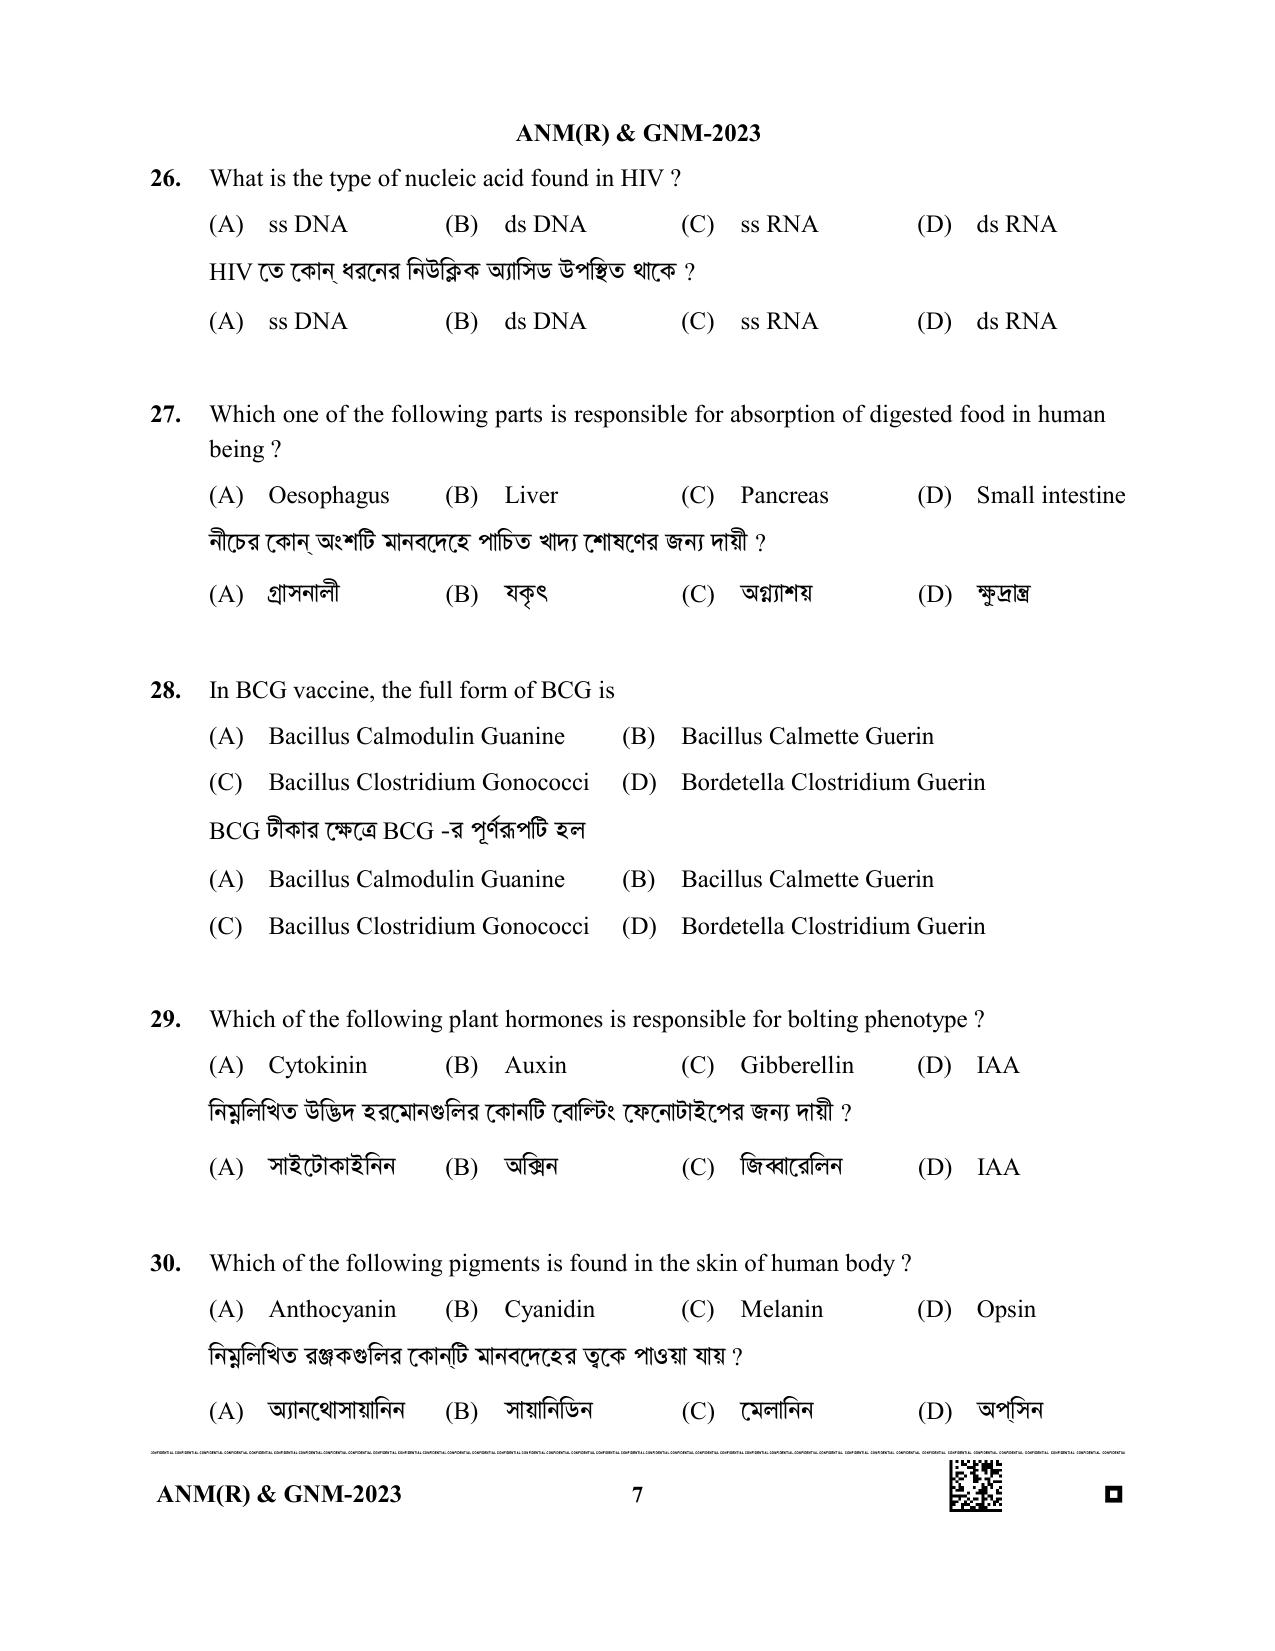 WB ANM GNM 2023 Question Paper - Page 7